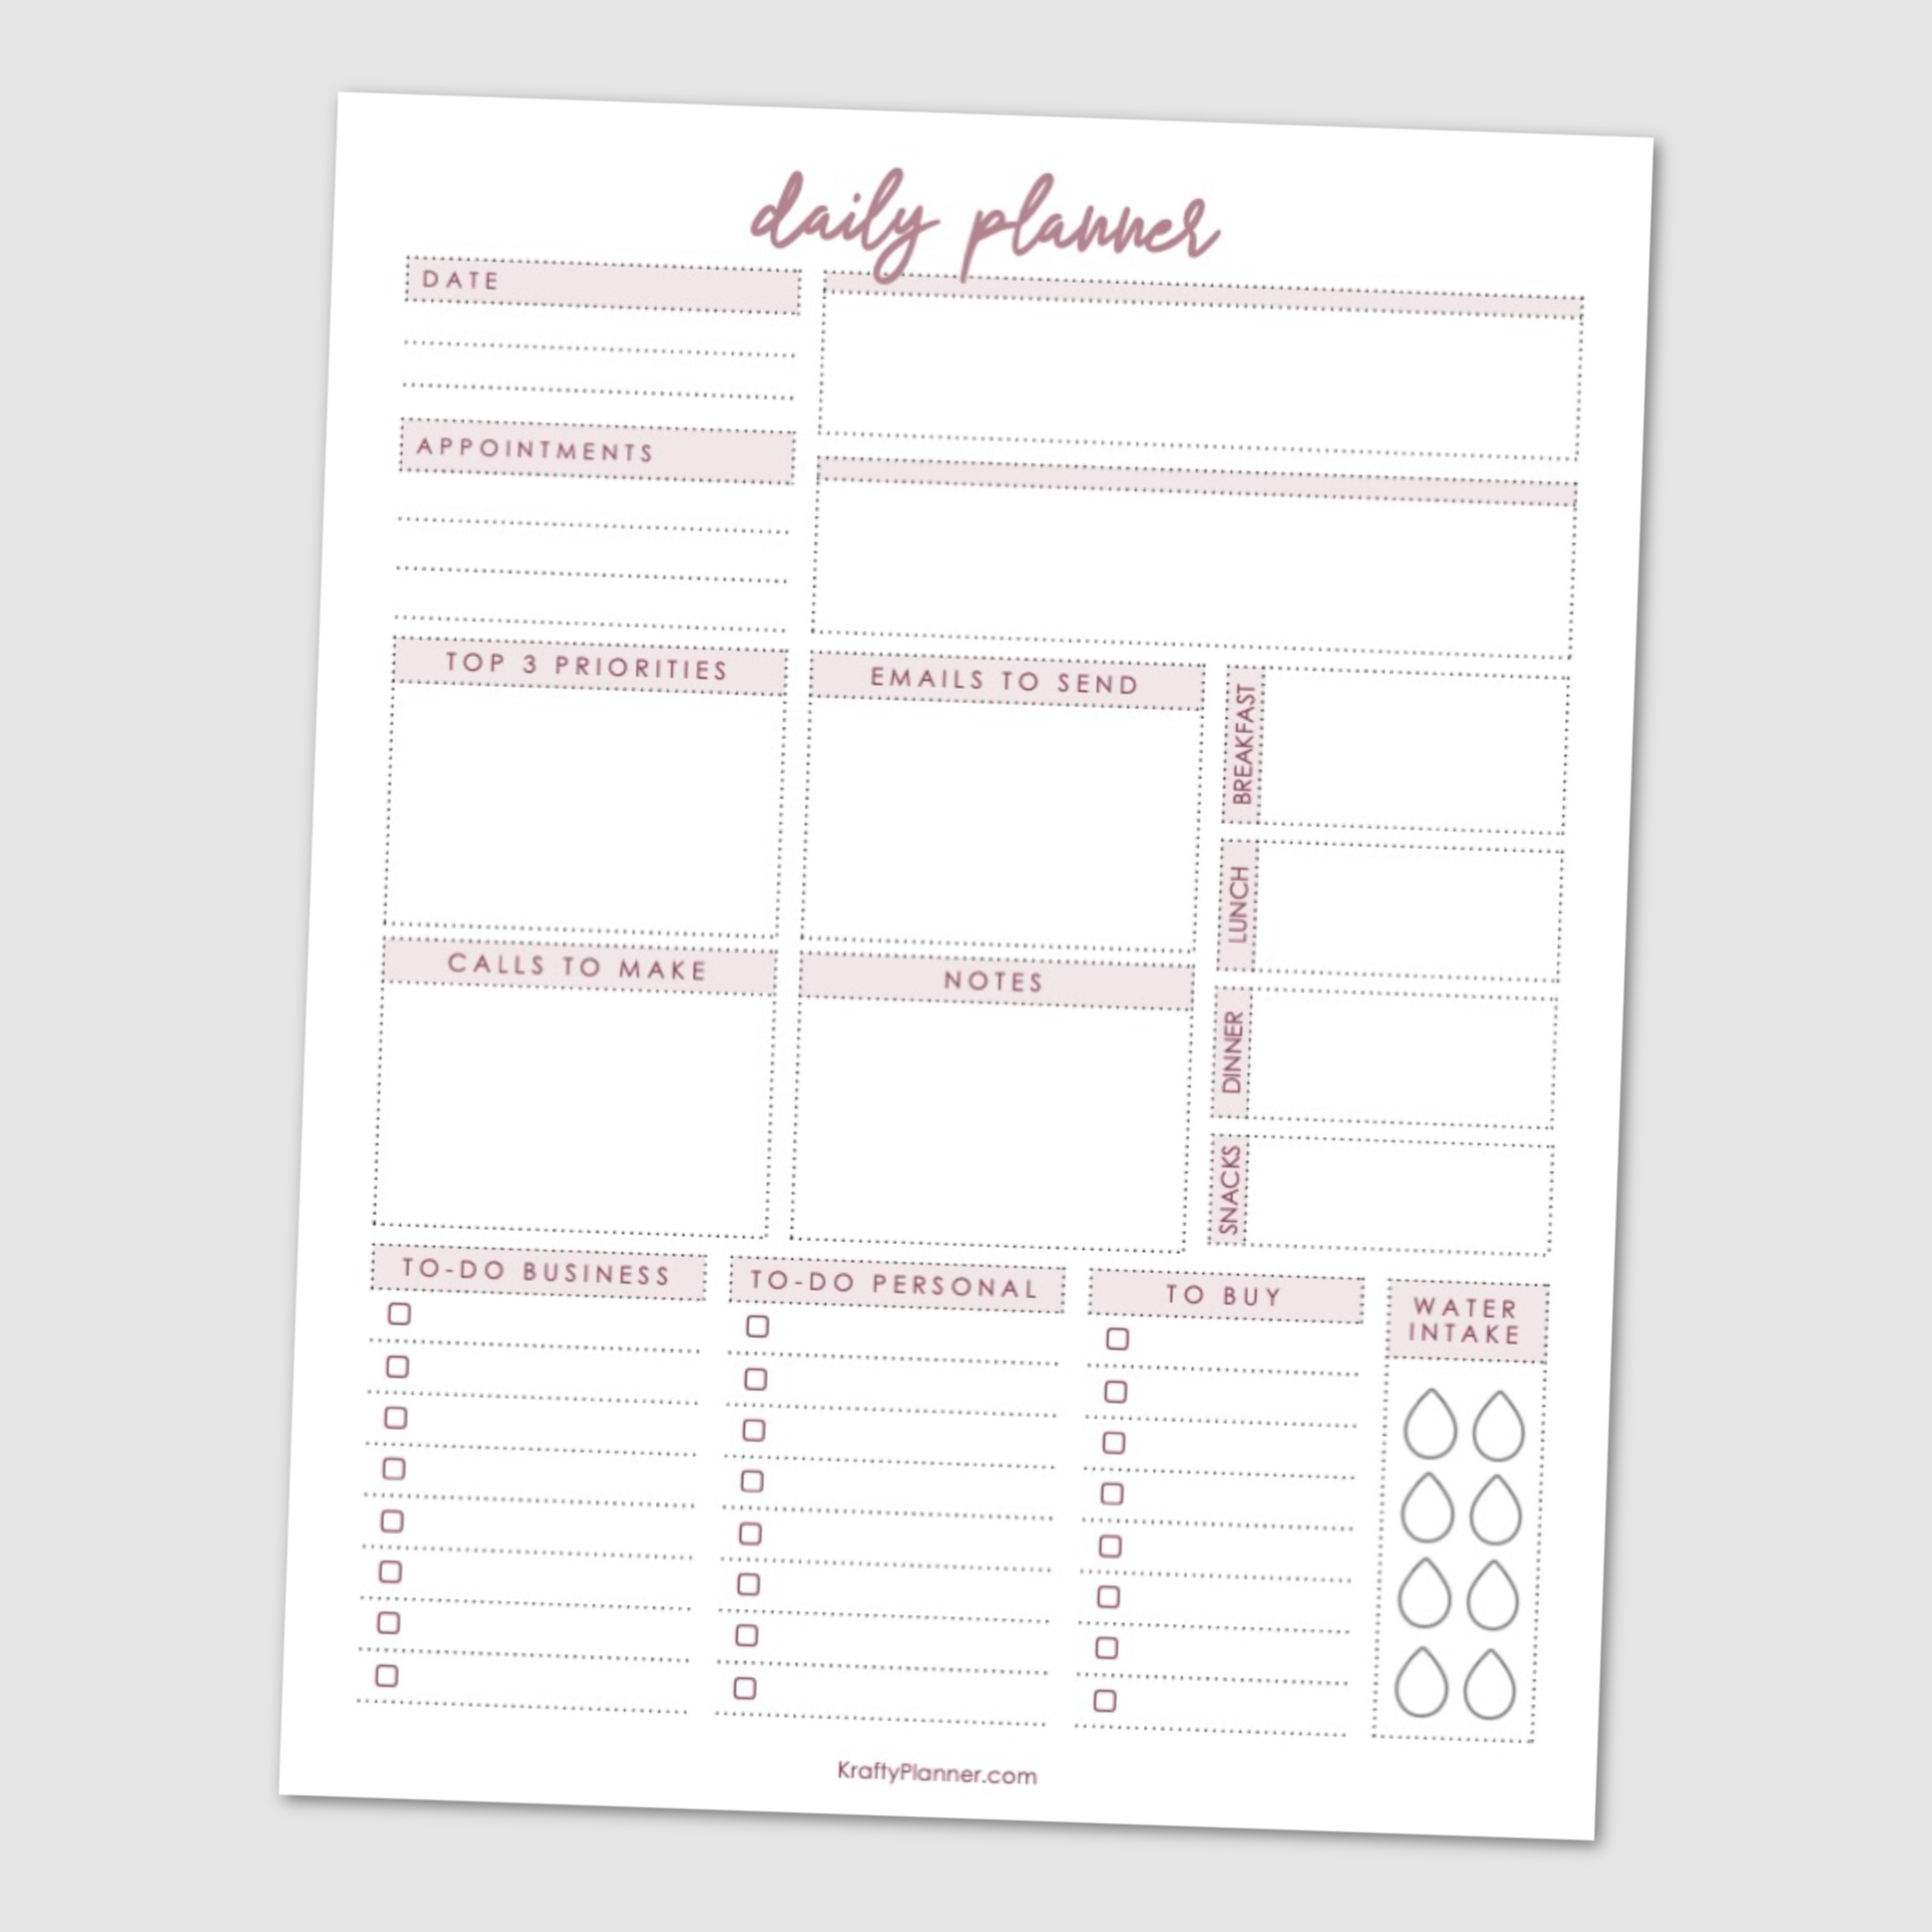 adhd-planner-adhd-planner-printable-adhd-daily-planner-adhd-planner